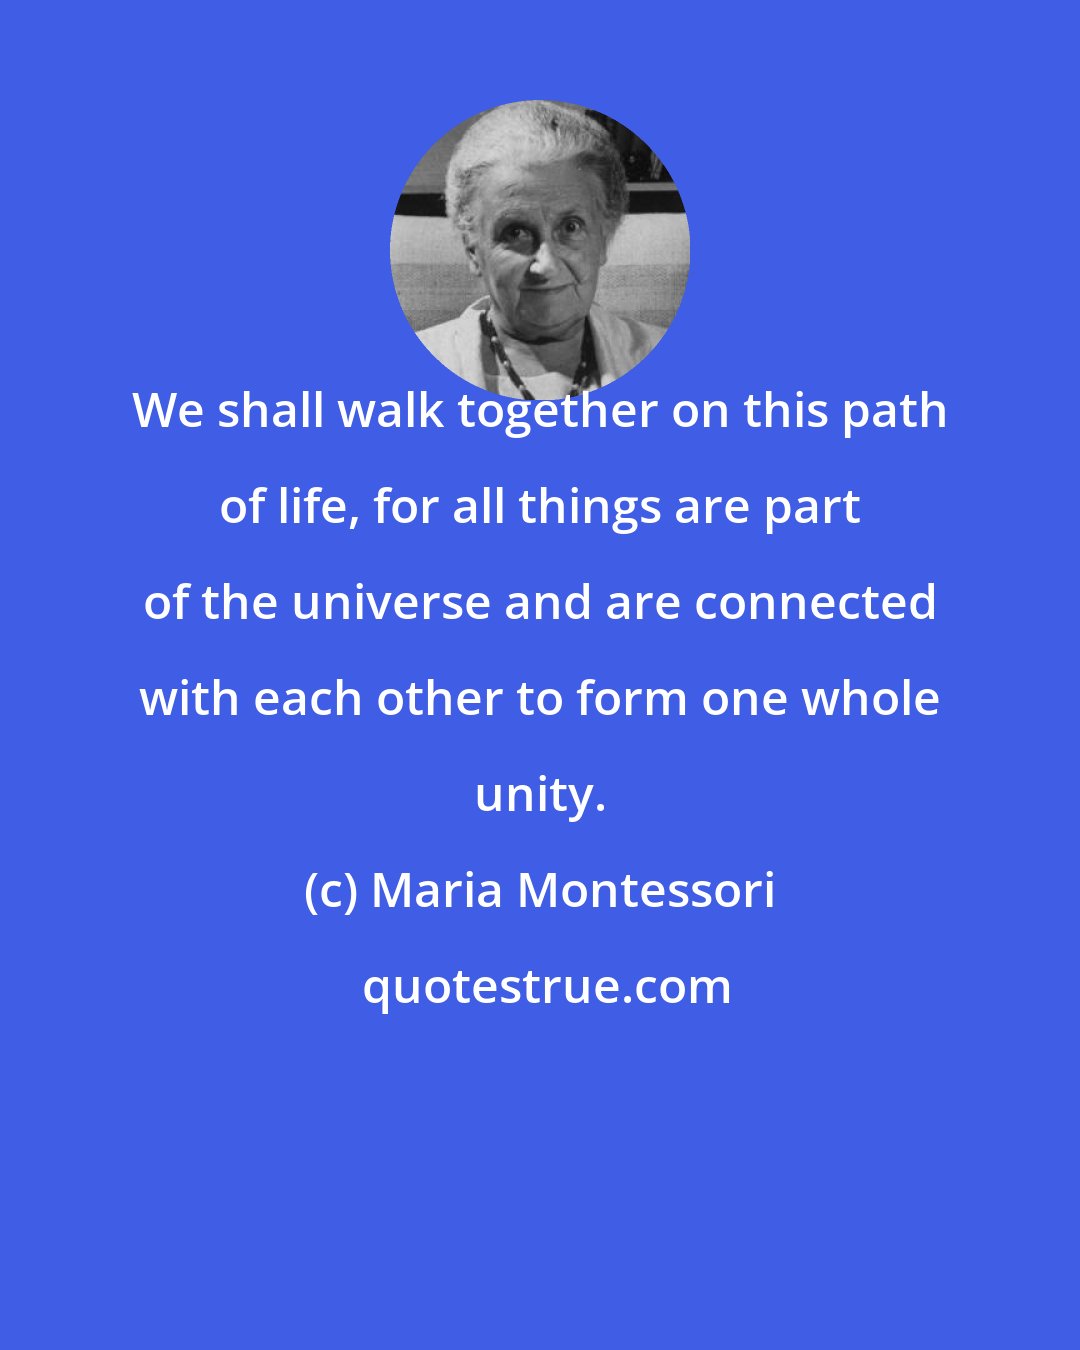 Maria Montessori: We shall walk together on this path of life, for all things are part of the universe and are connected with each other to form one whole unity.